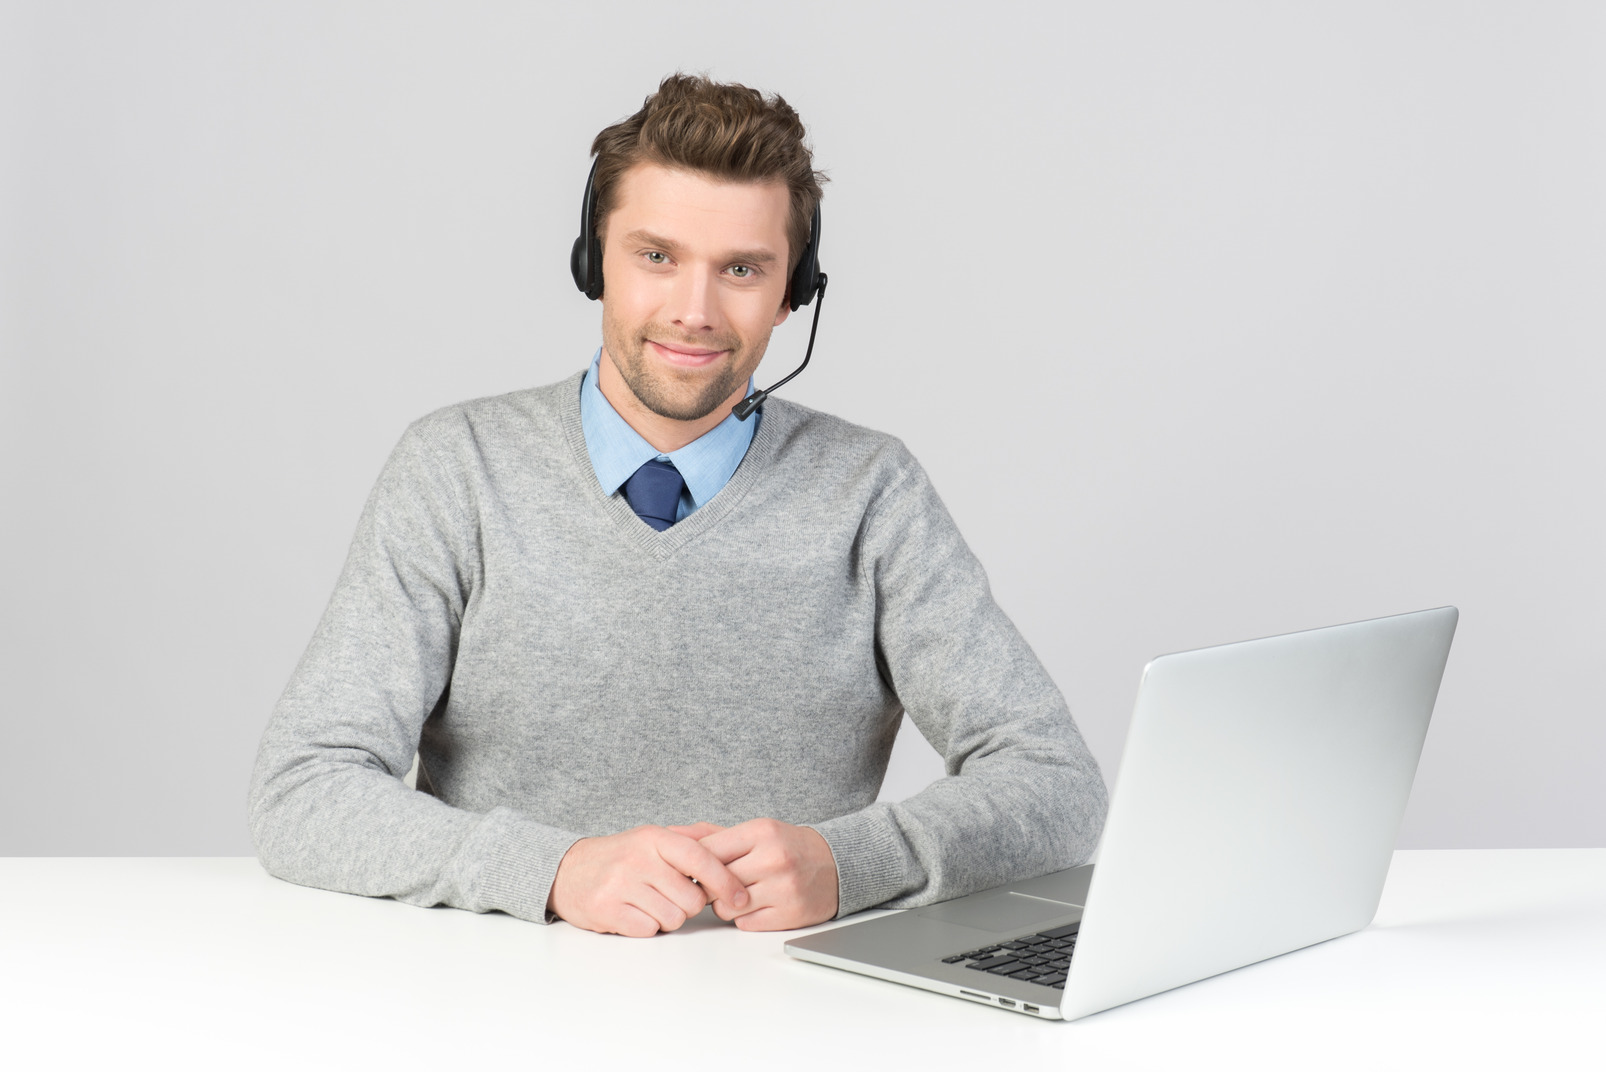 Call center agent sitting at office desk with hands folded